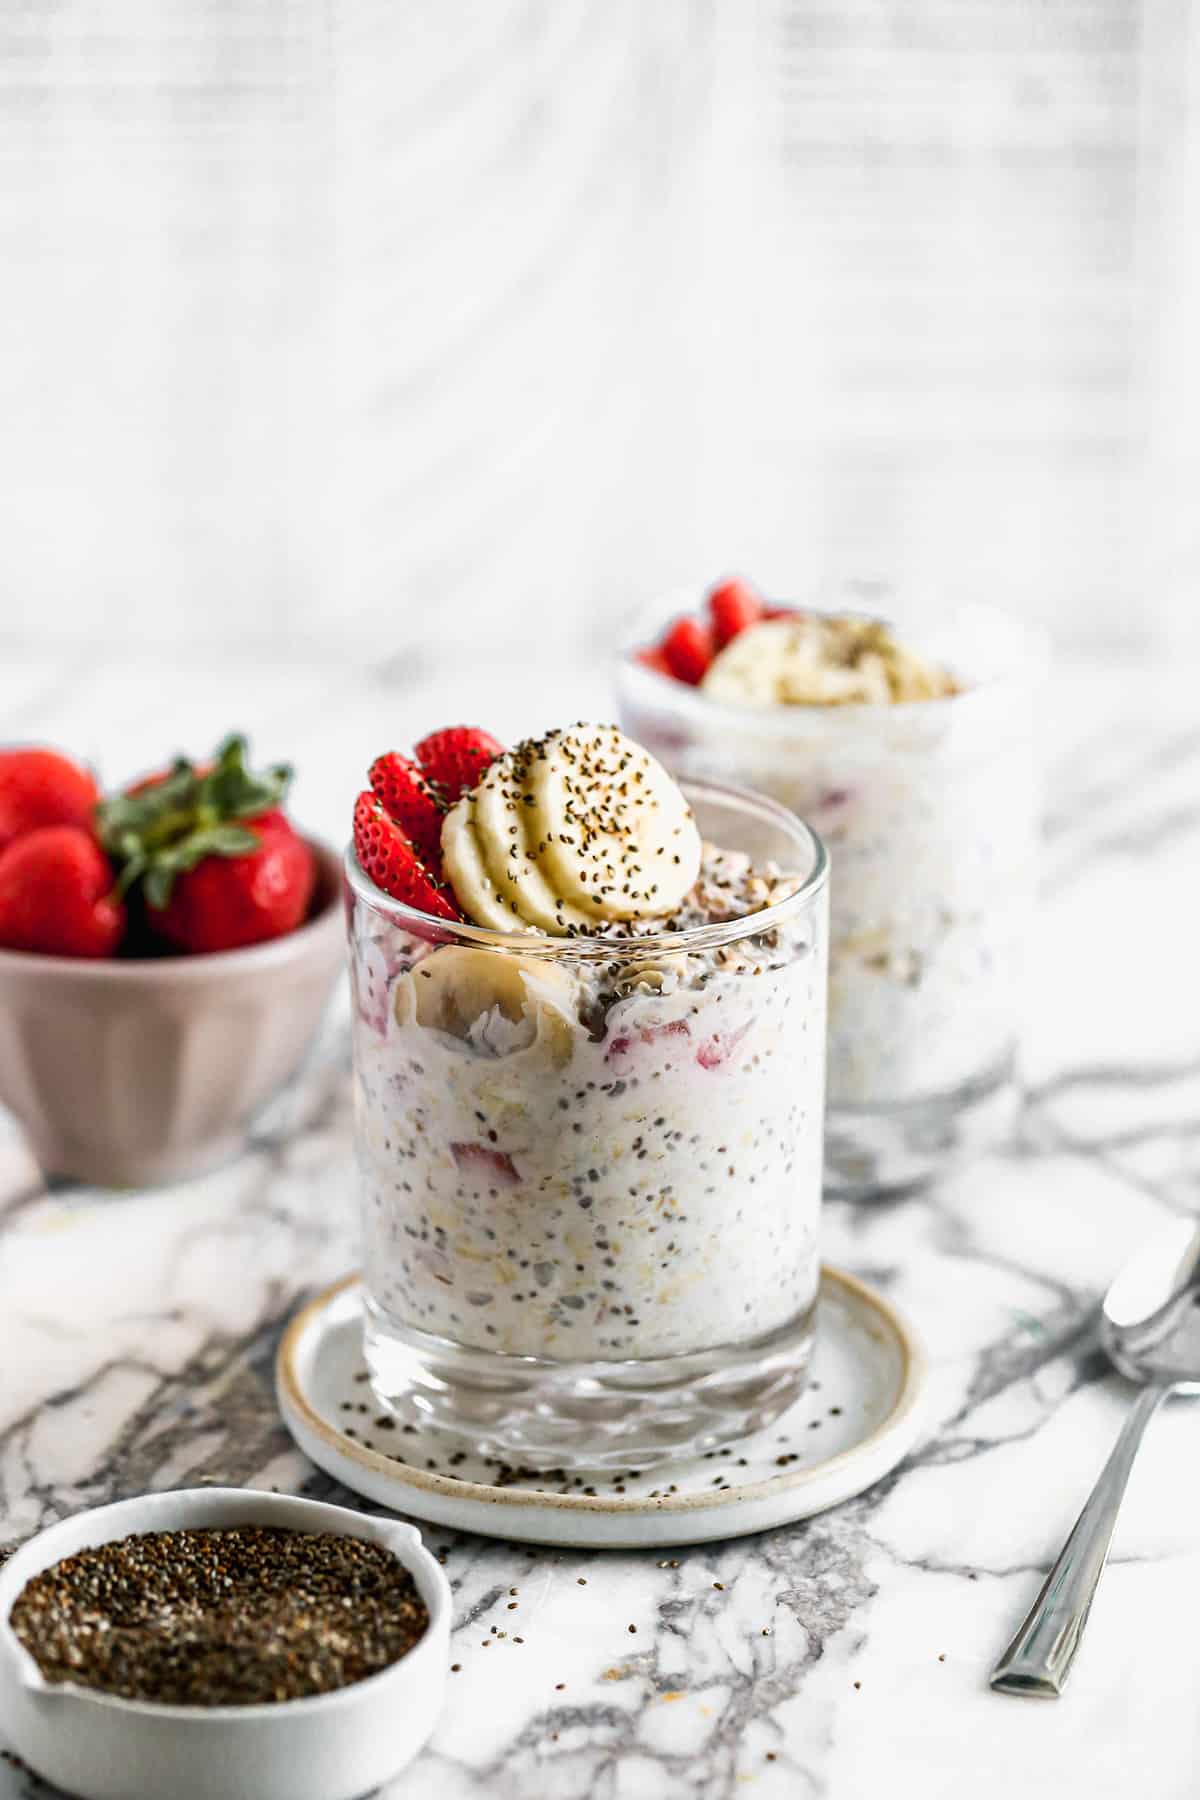 A clear glass filled with Strawberry Overnight Oats and topped with fresh sliced strawberries, bananas, and chia seeds.